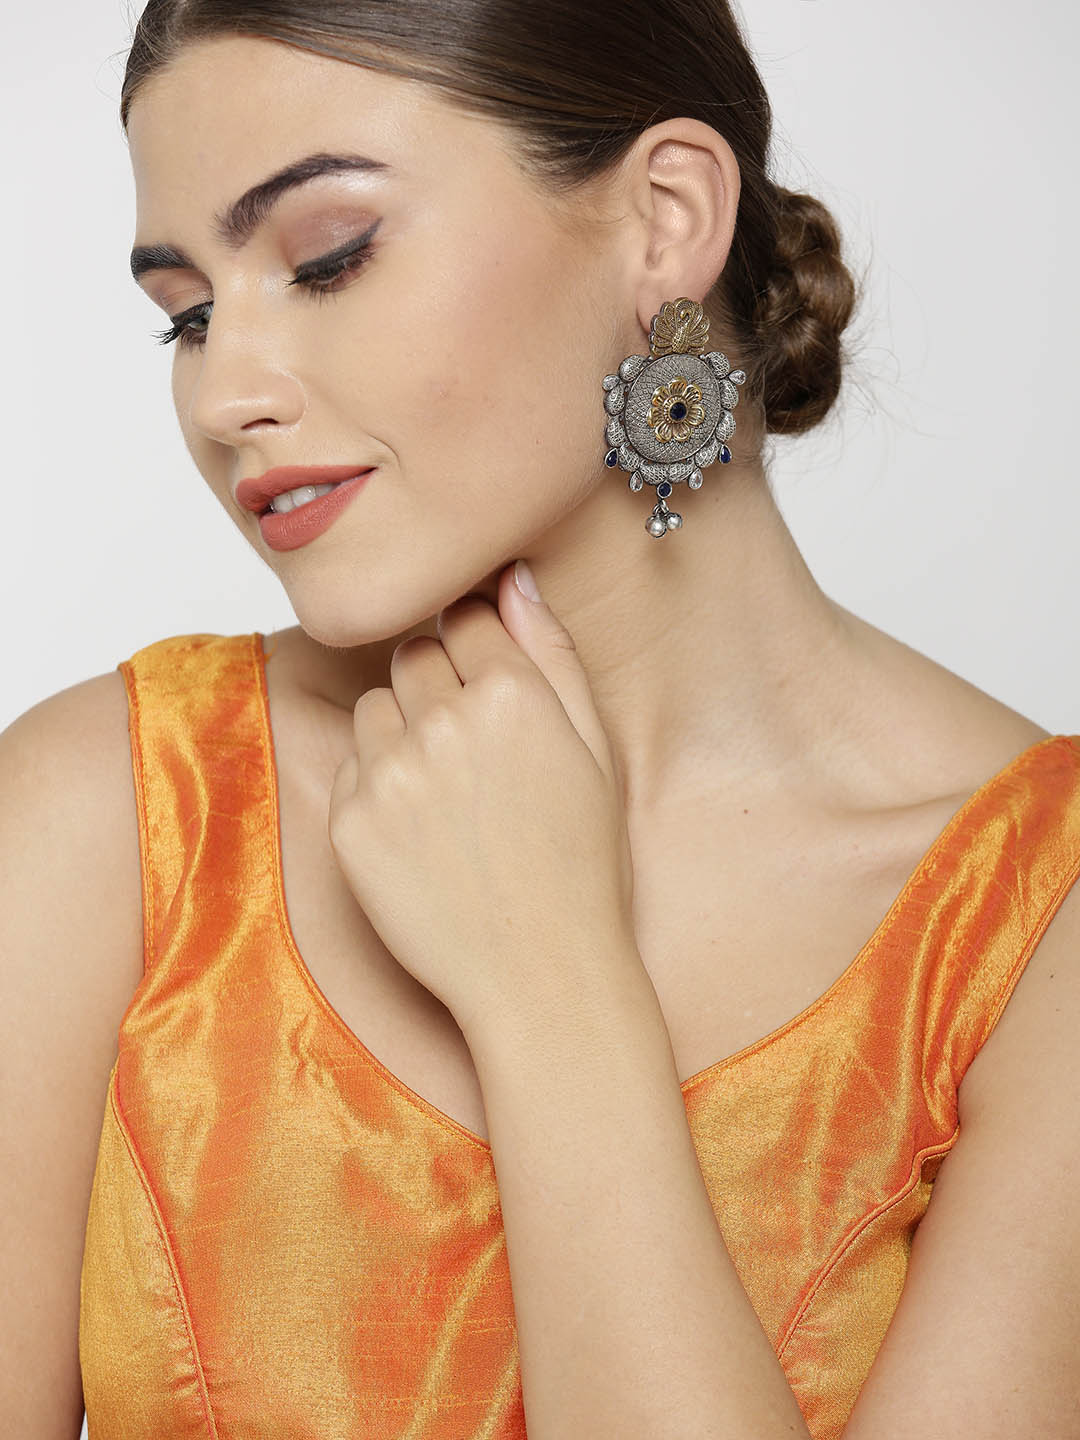 Oxidized Dual-Toned Peacock and Floral Inspired Antique, Textured Drop Earrings